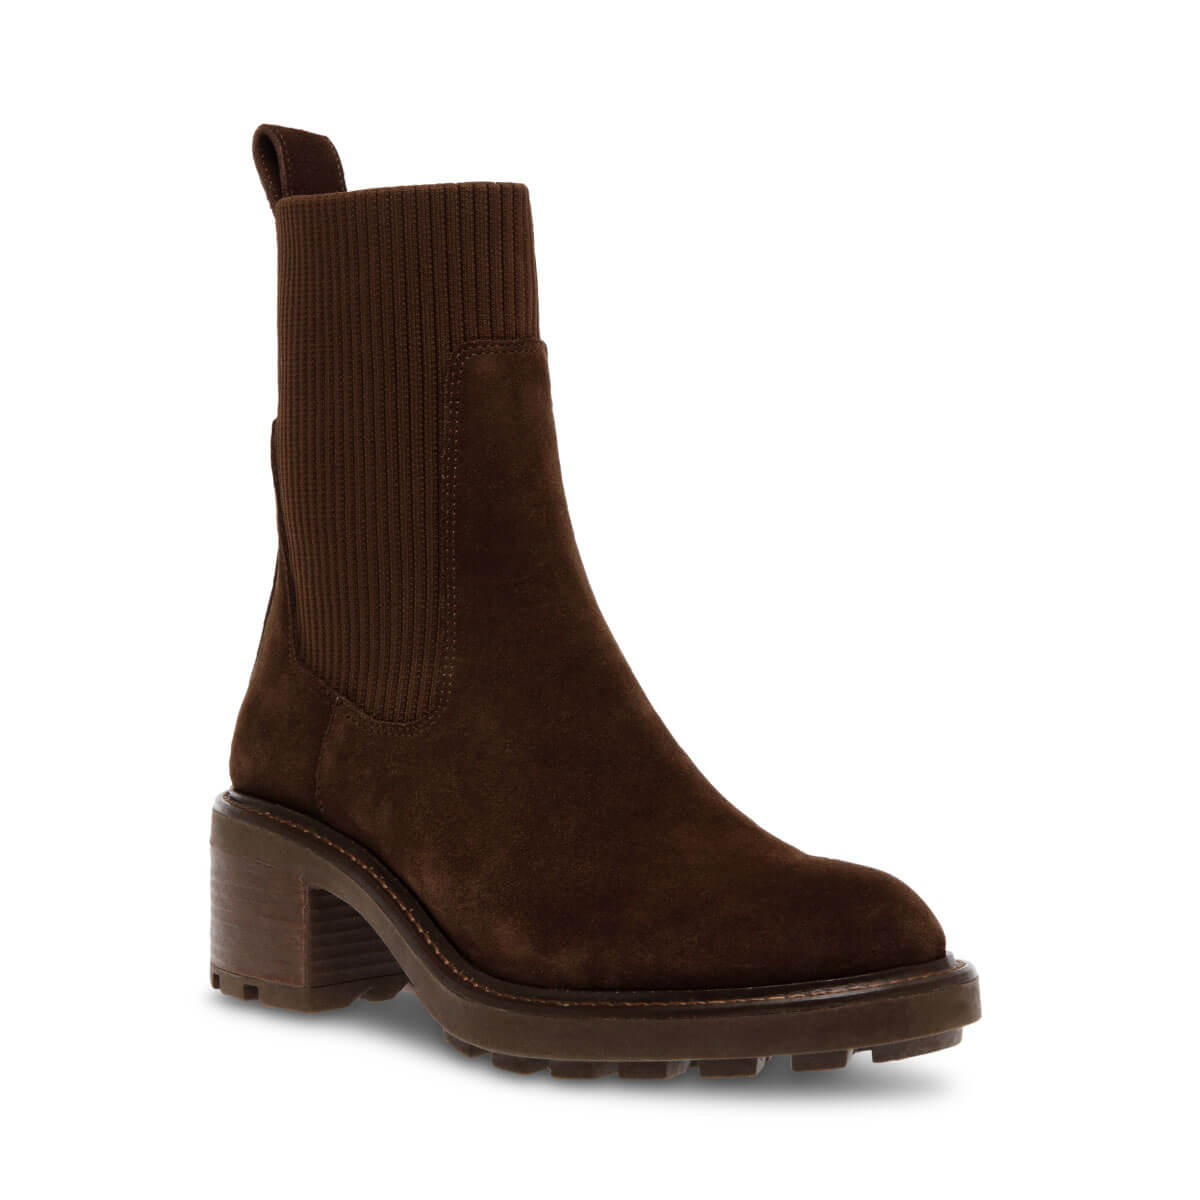 Steve Madden Kiley Platform Bootie brown front | MILK MONEY milkmoney.co | cute shoes for women. ladies shoes. nice shoes for women. footwear for women. ladies shoes online. ladies footwear. womens shoes and boots. pretty shoes for women. beautiful shoes for women.